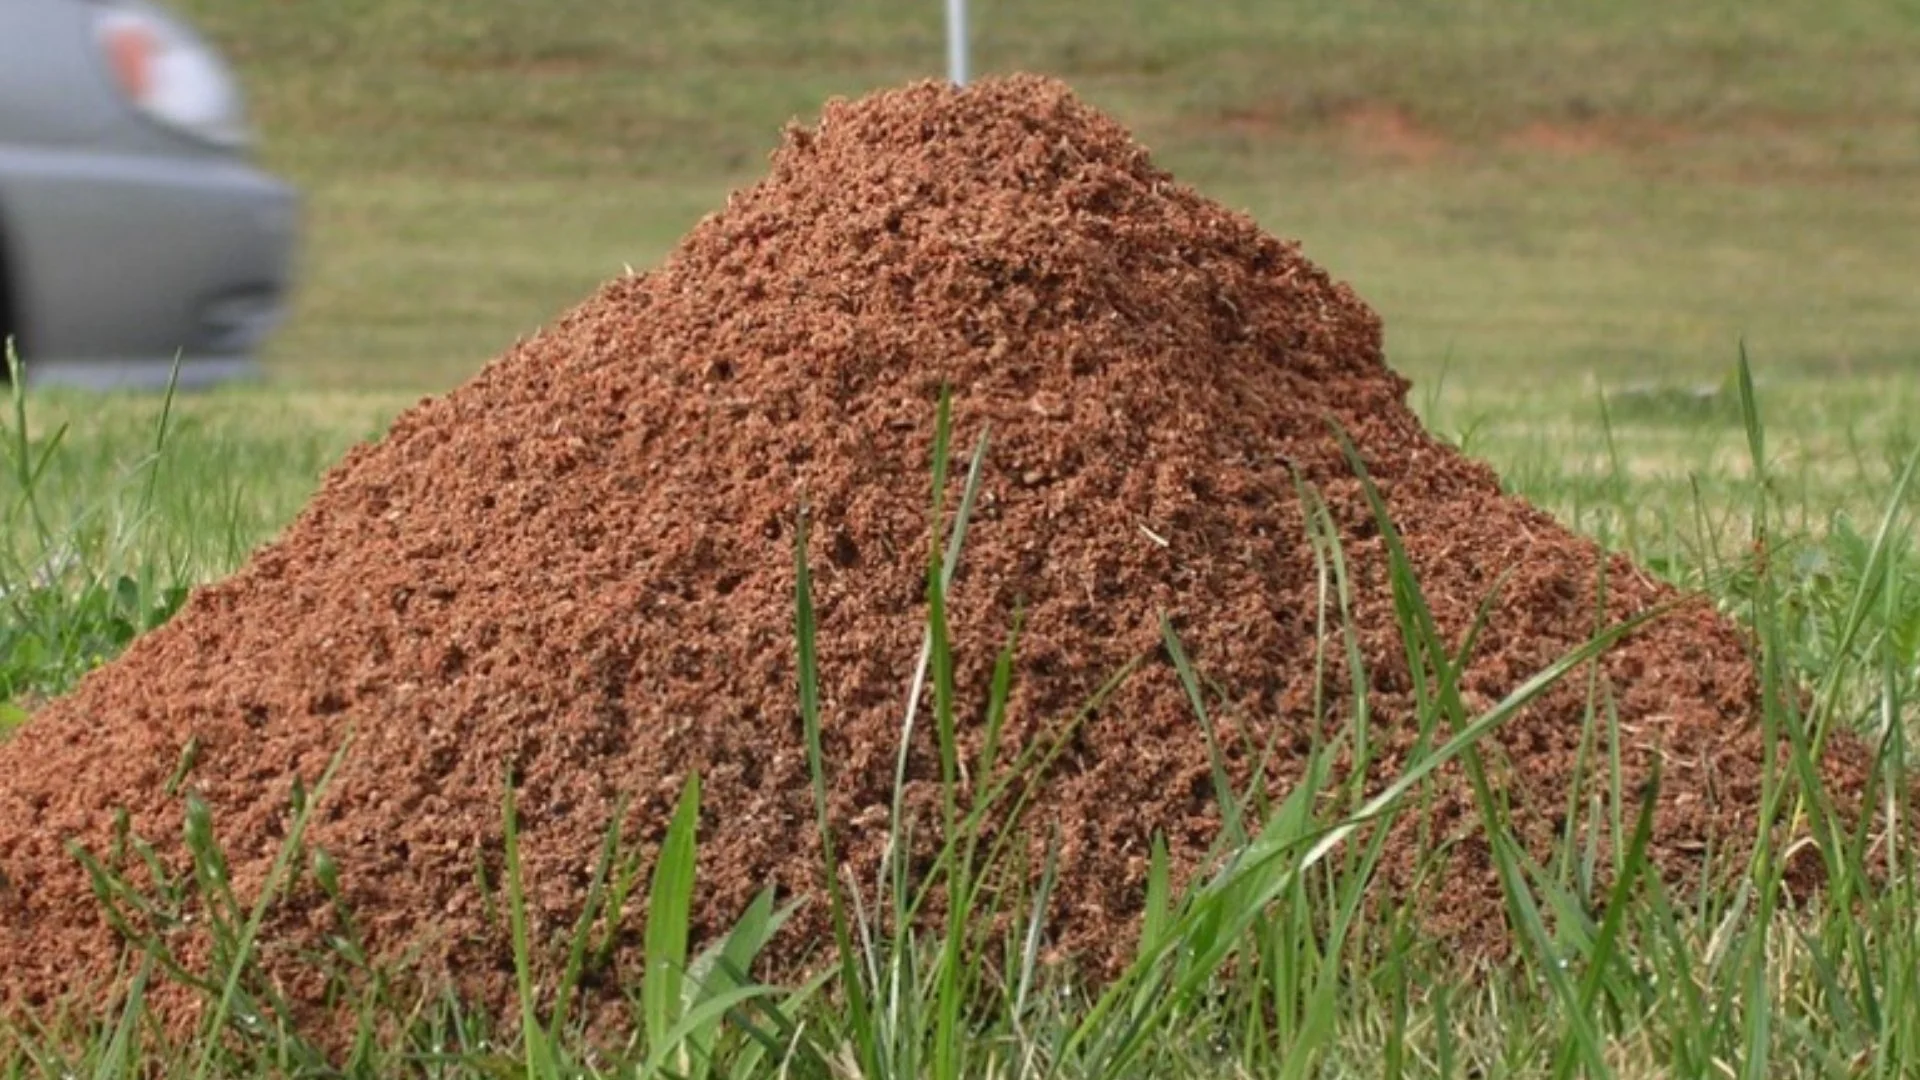 How Long Can You Expect a Fire Ant Treatment to Last?